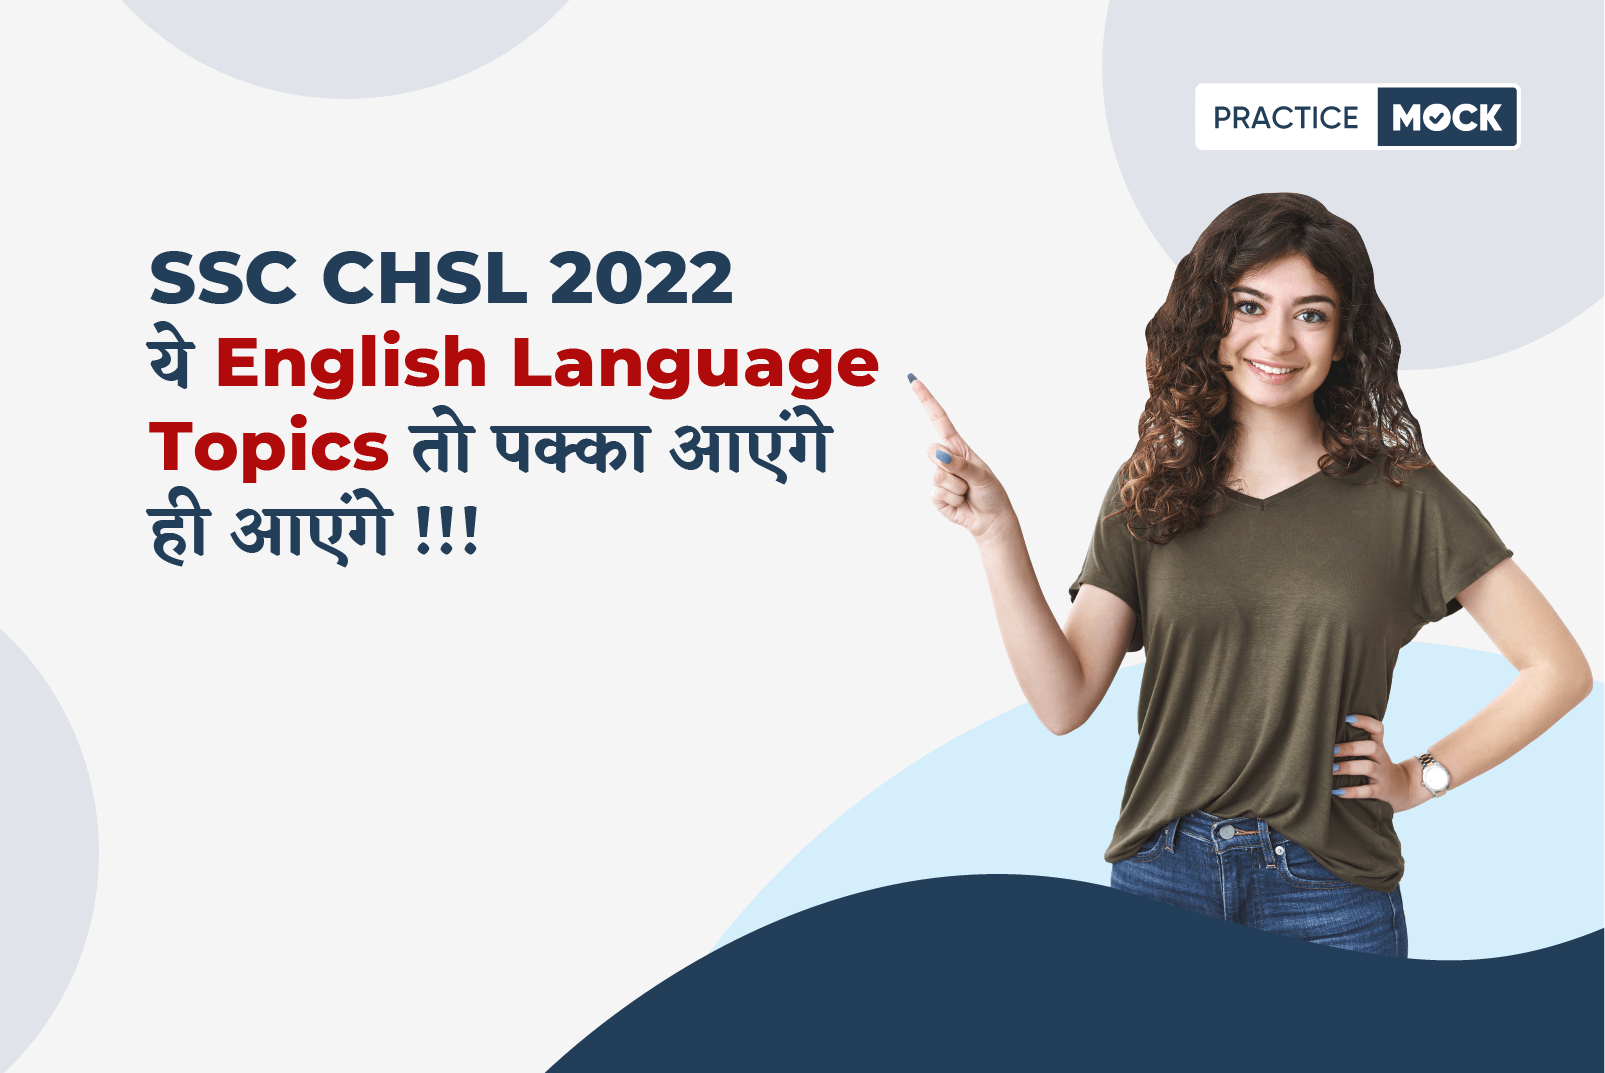 Expected English Language Topics in SSC CHSL 2022